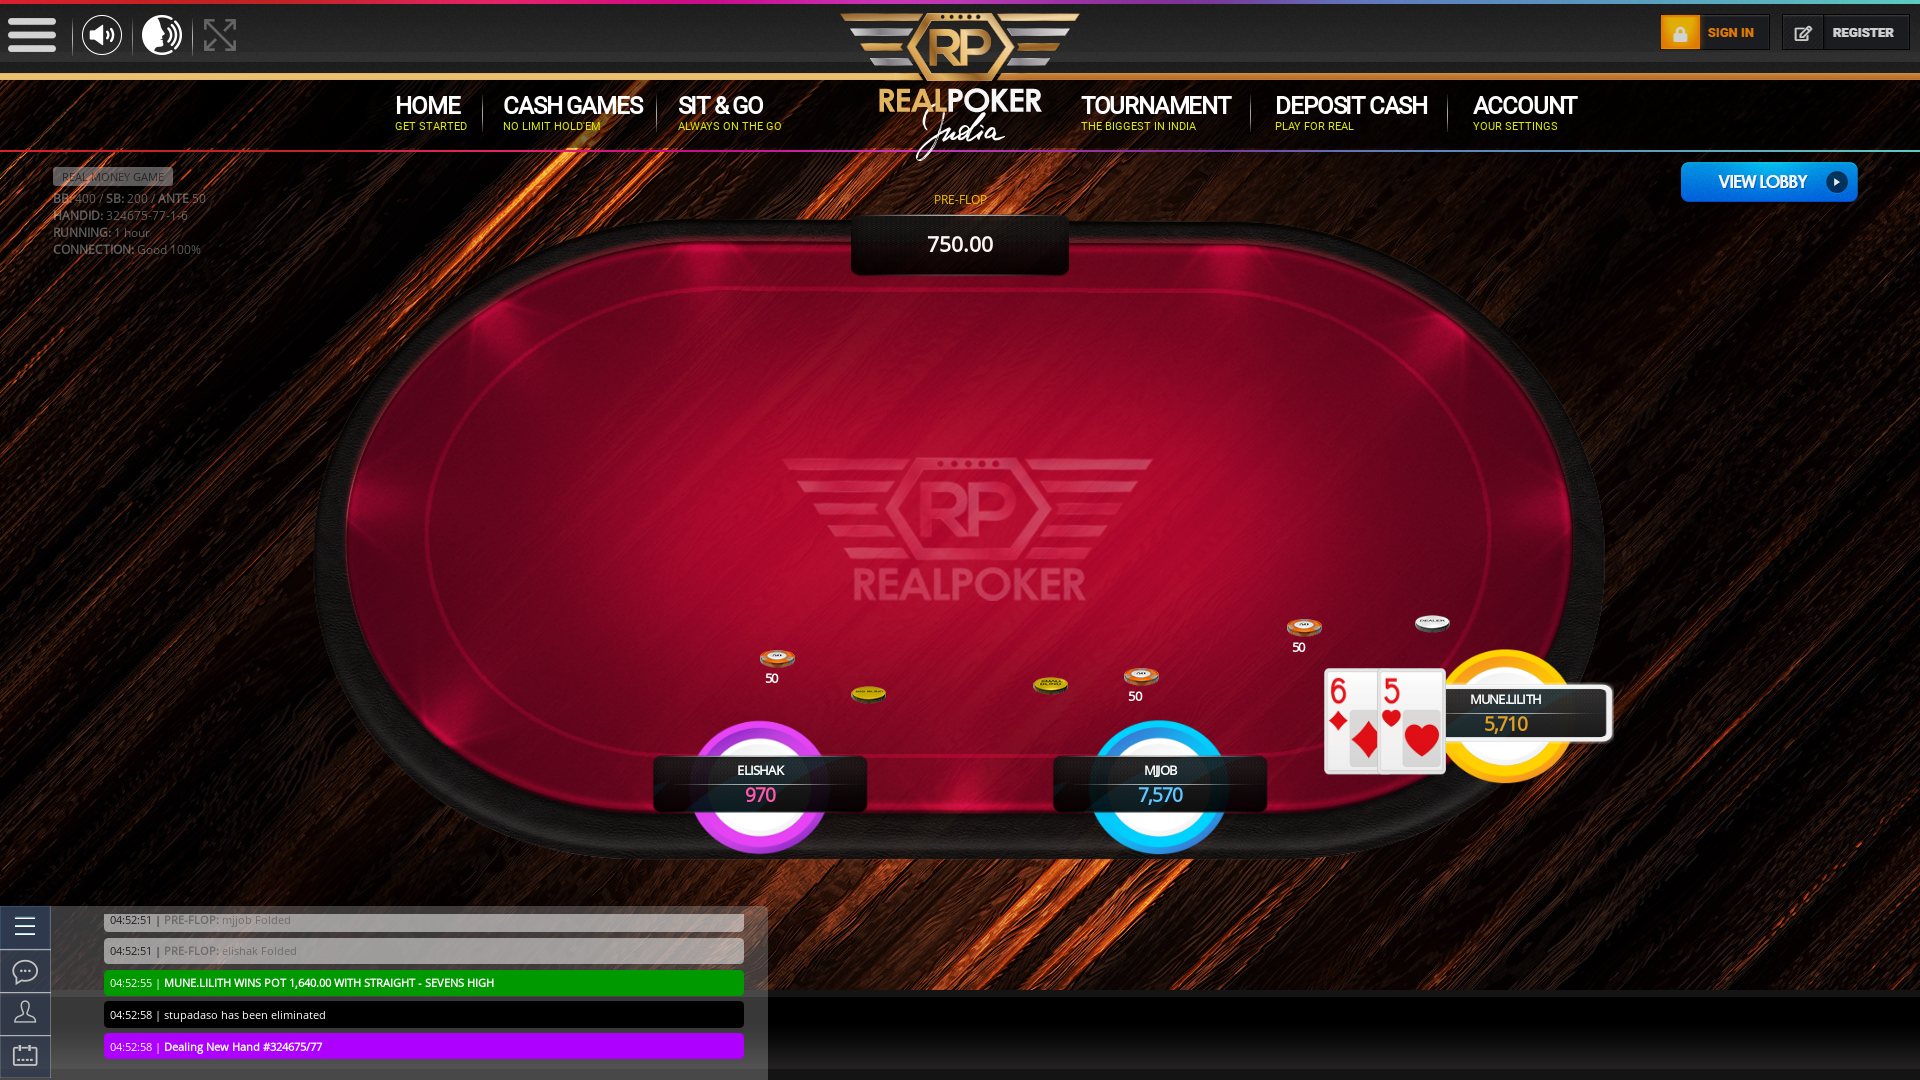 Bandra Mumbai online poker game on a 10 player table in the 62nd minute of the game